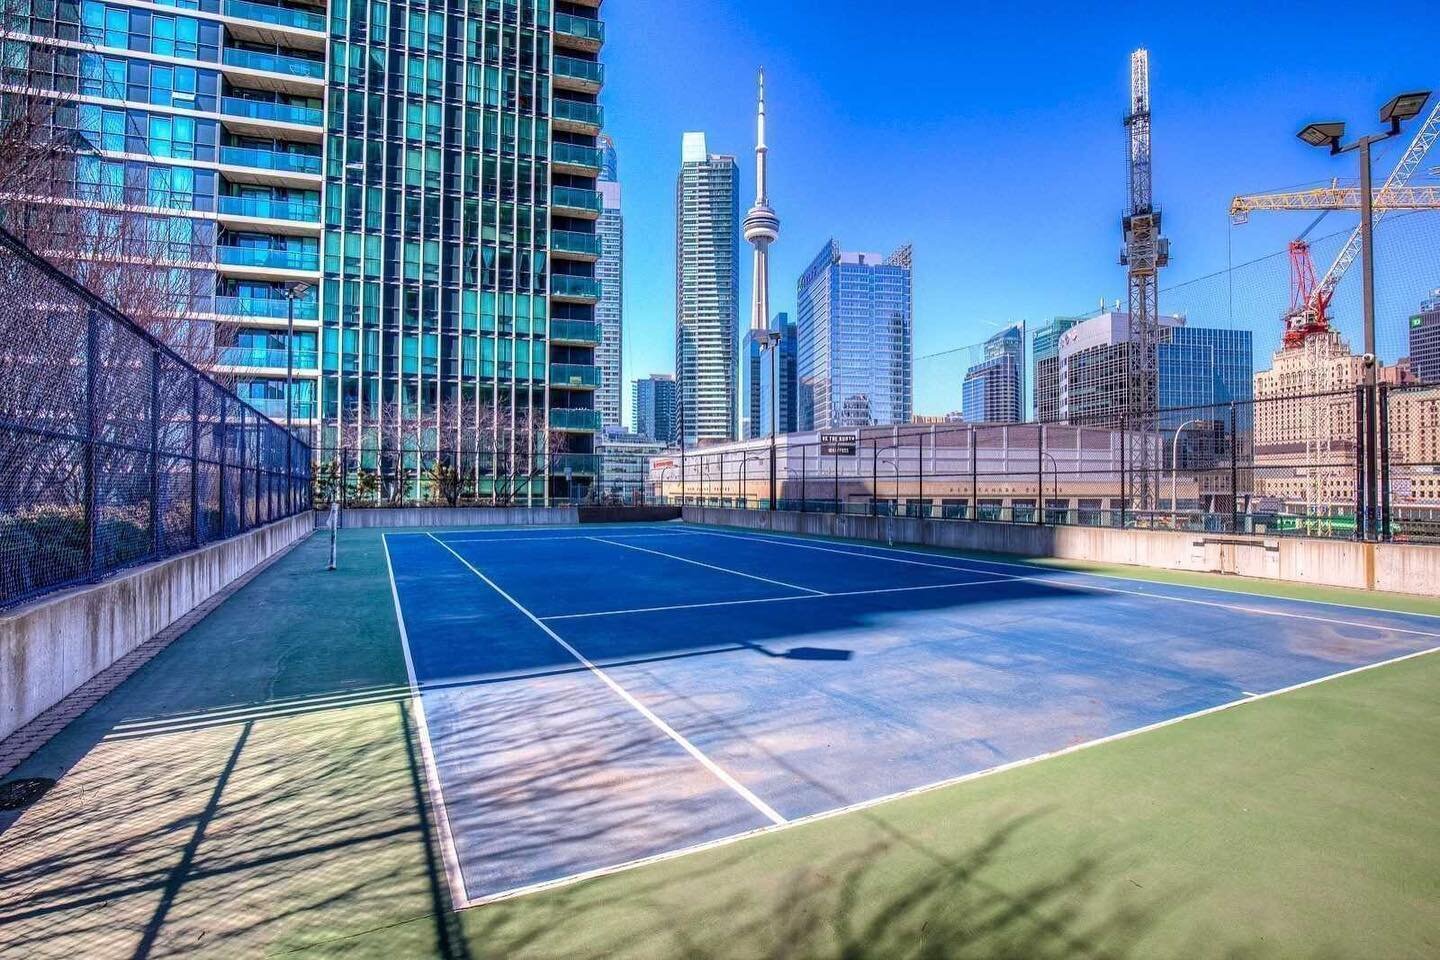 A tennis court on the fifth floor 🎾 NEW LISTING at 33 Bay Street
 .
.
.
#propertymanagement #realestate #gtarealestate #gtahomes #toronto #torontorealestate #realestatetoronto #condo #torontohomes #torontolife #torontomls #torontocondos #luxurylisti